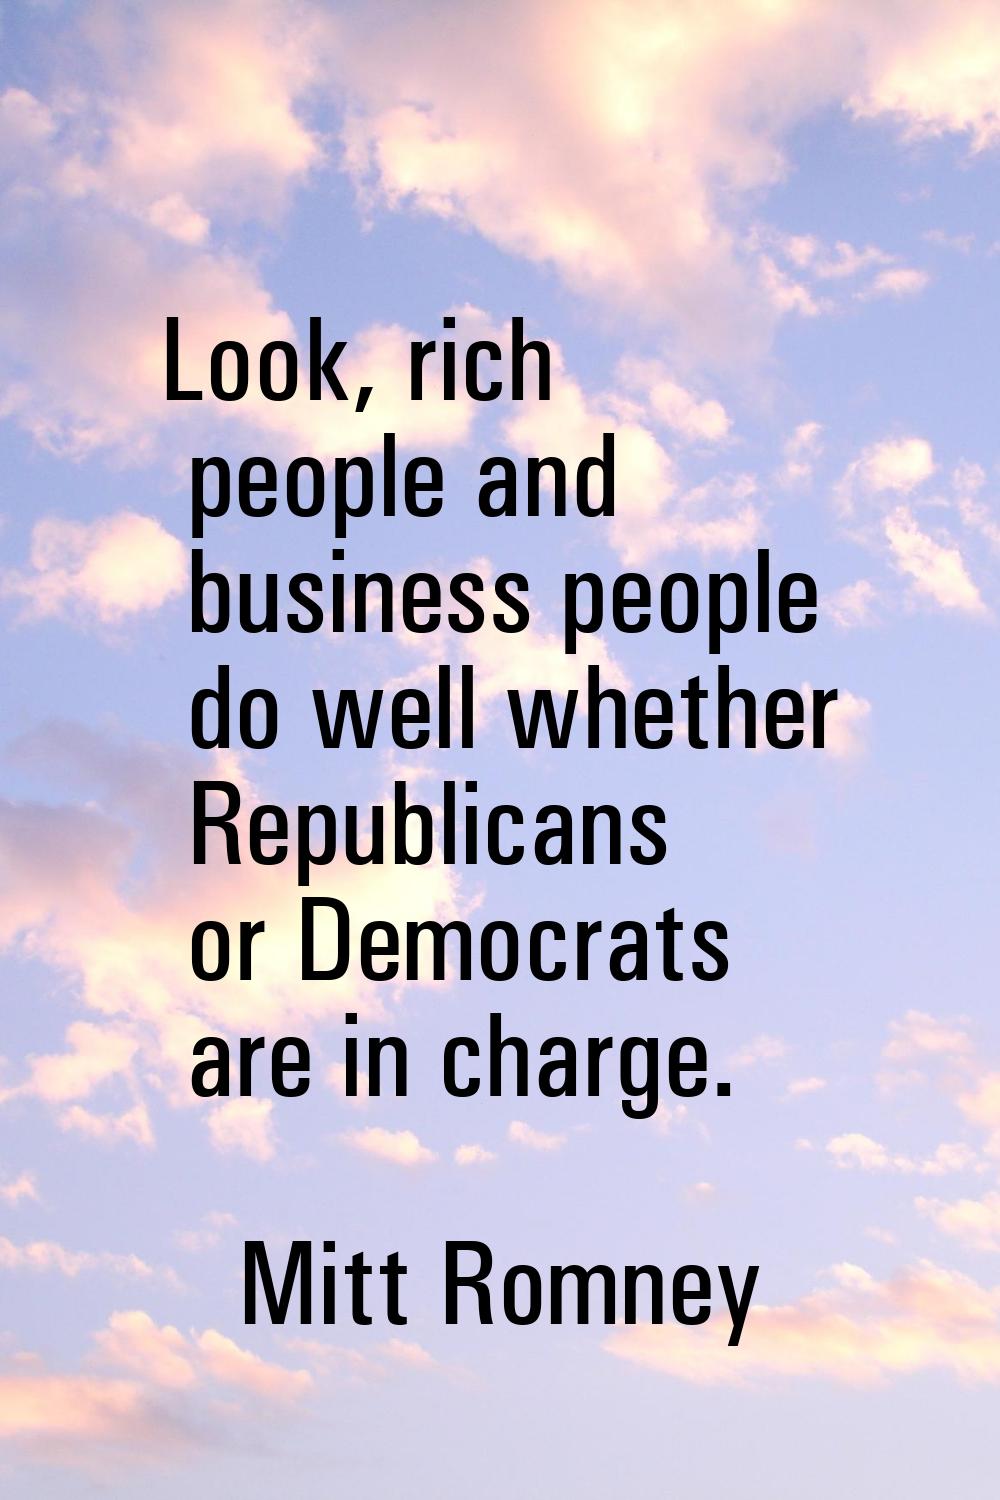 Look, rich people and business people do well whether Republicans or Democrats are in charge.